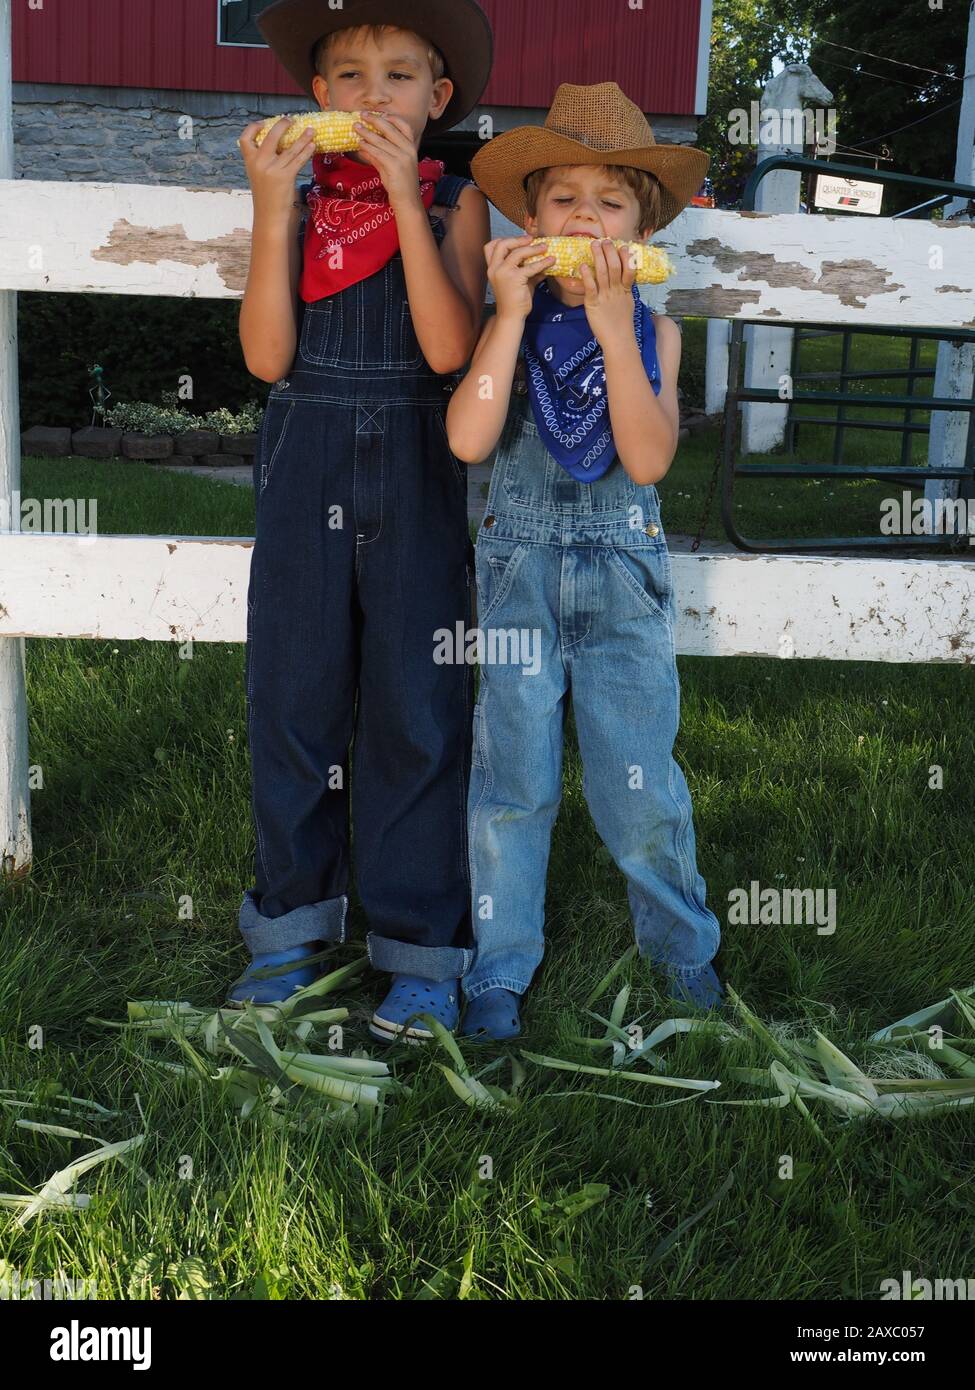 Vertical shot of two little boys in overalls eating corn while standing in front of a fence Stock Photo